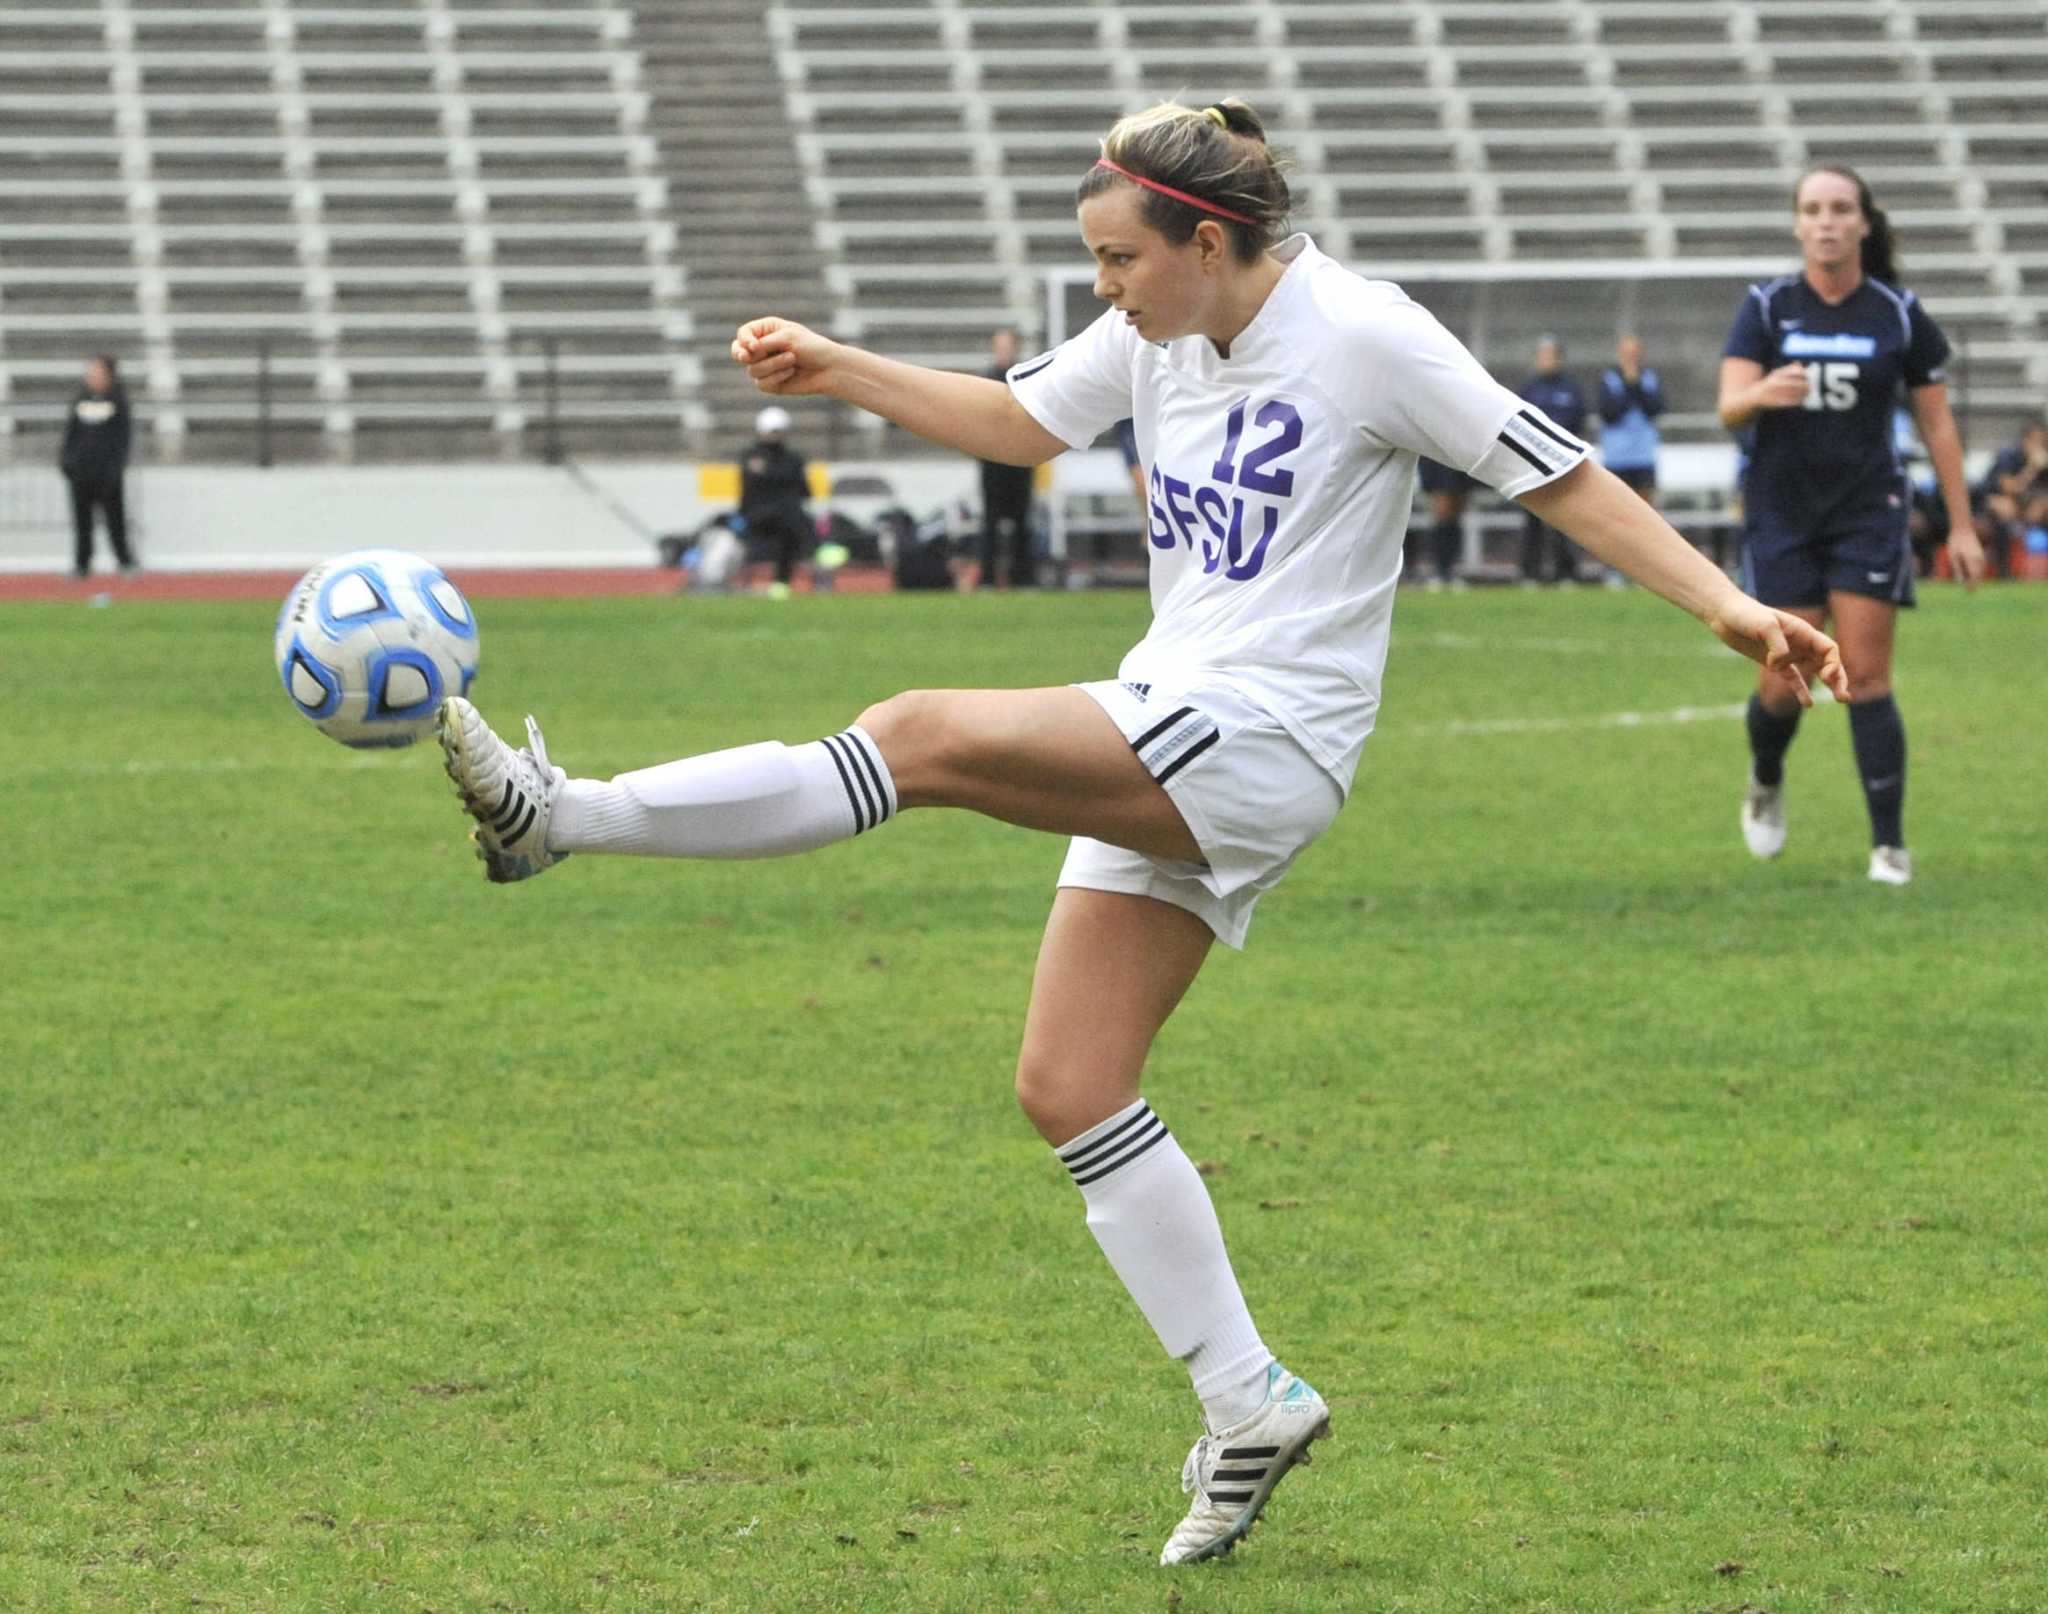 SF State Gators player Graceann Rettig, #12, volleys the ball during a game agianst the Sonoma State Seawolves at Cox Stadium Thursday, Oct. 30, 2014. Sara Gobets/Xpress.